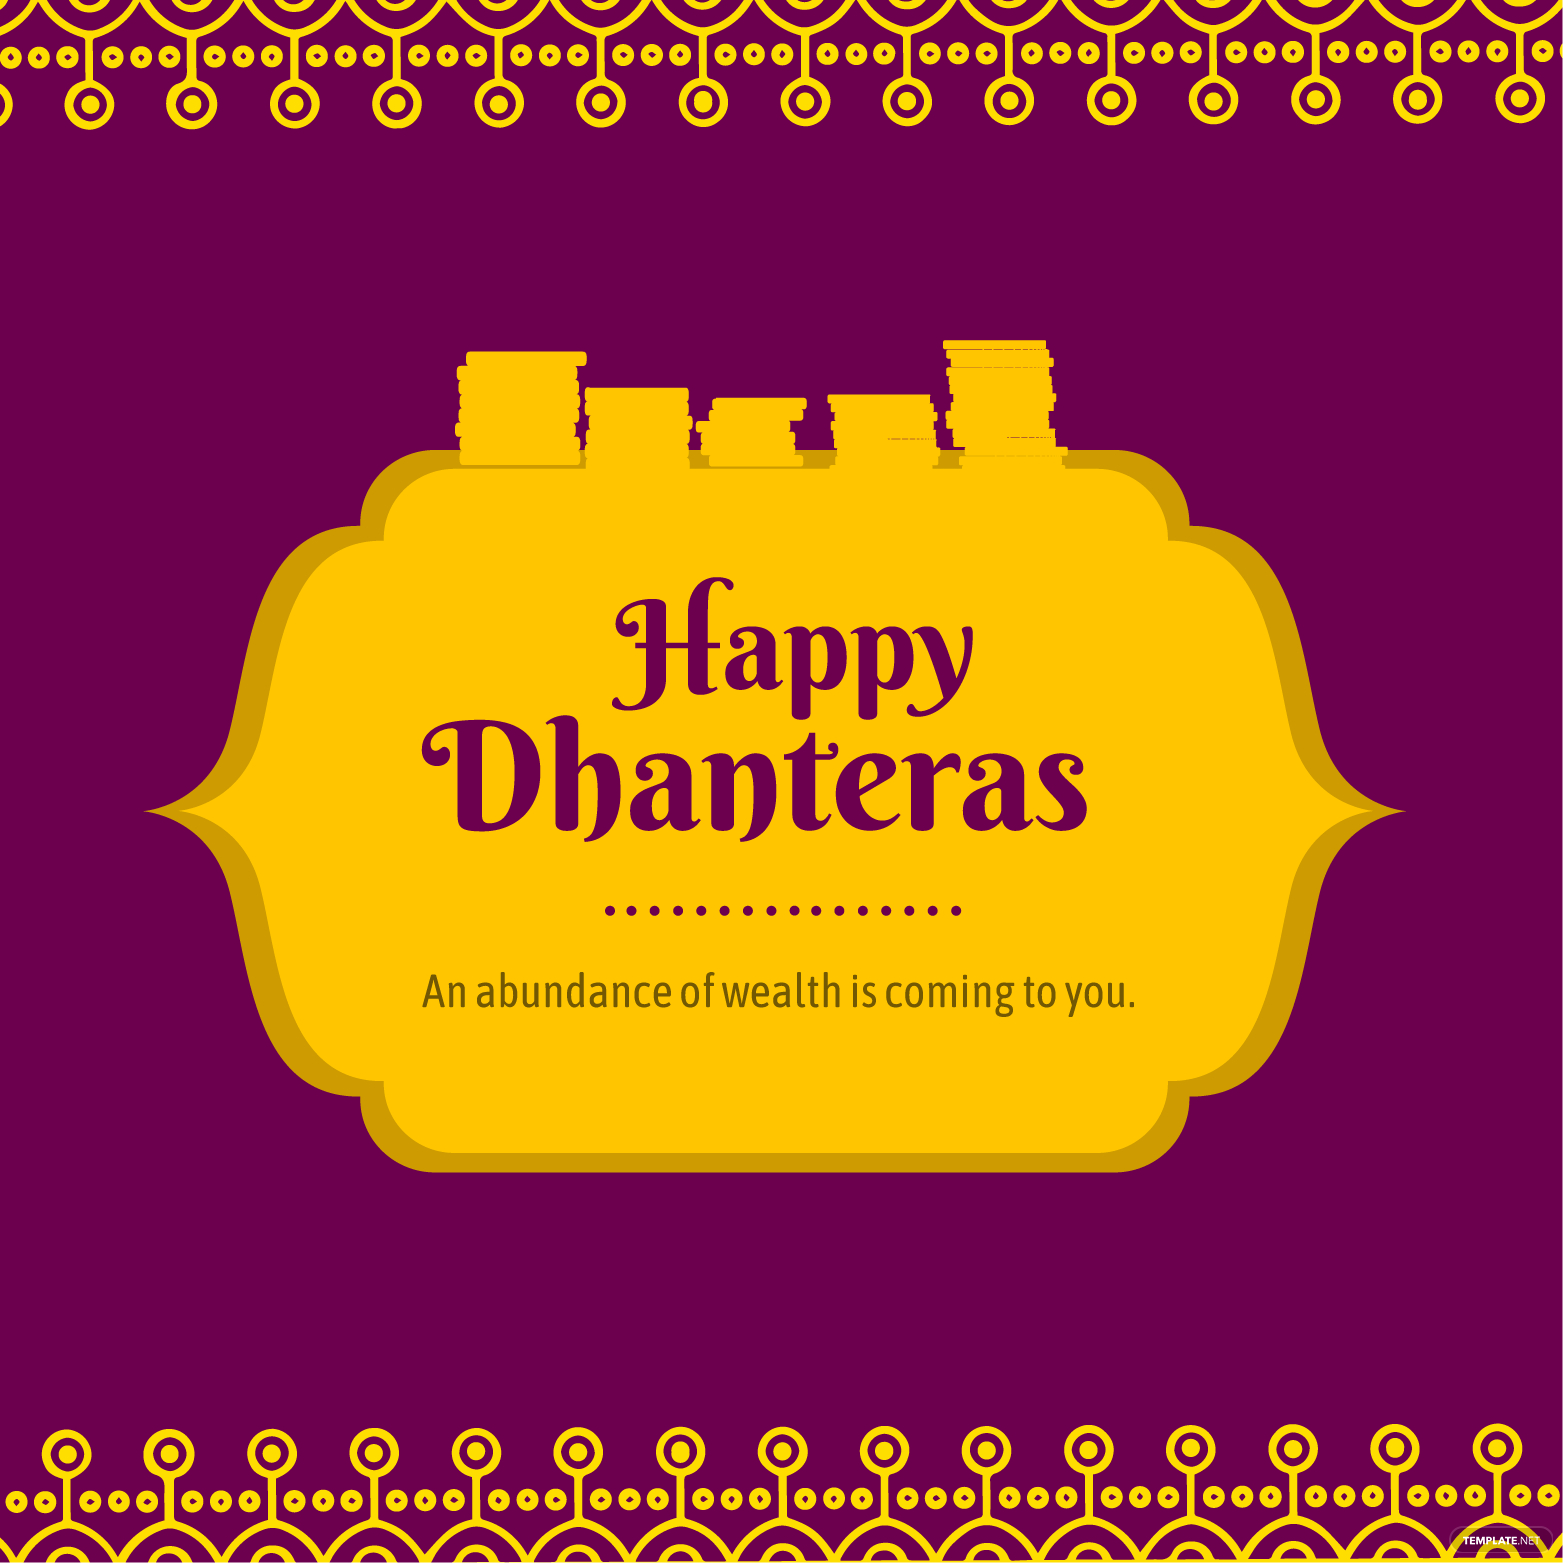 dhanteras poster ideas and examples